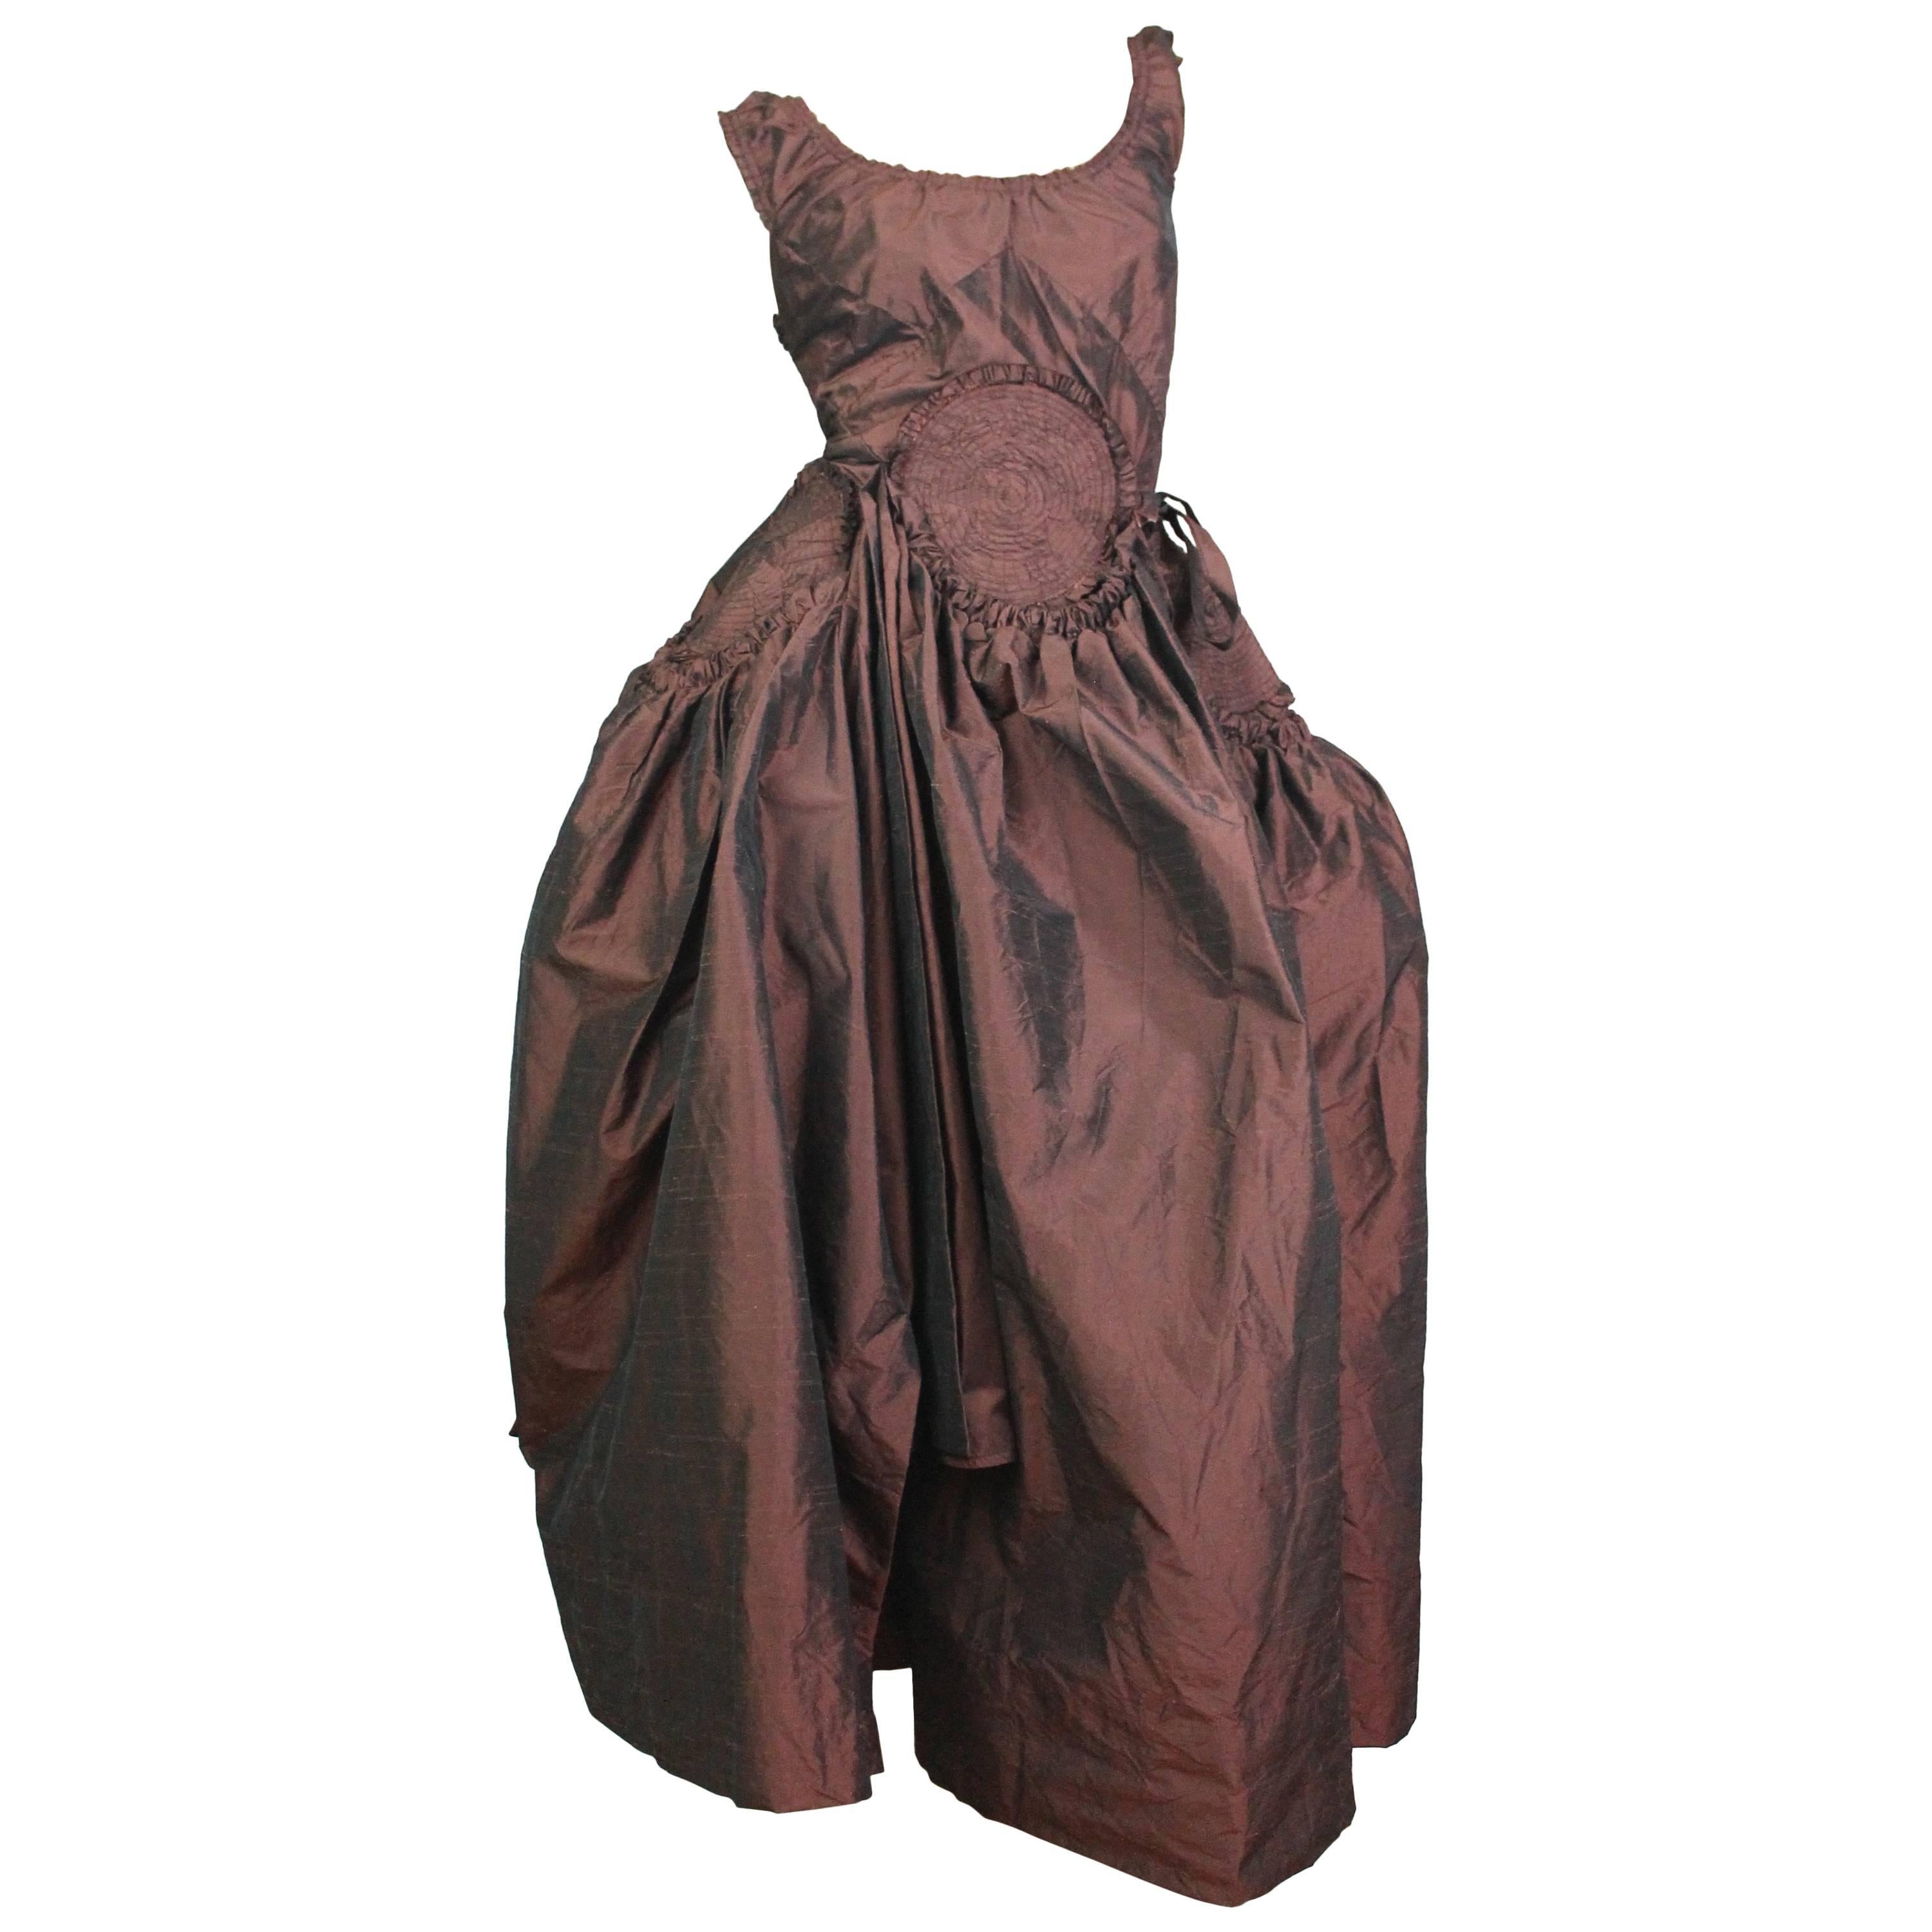 Vivienne Westwood Copper "Cartwheel Dress" from Gold Label AW2011 Size US 6